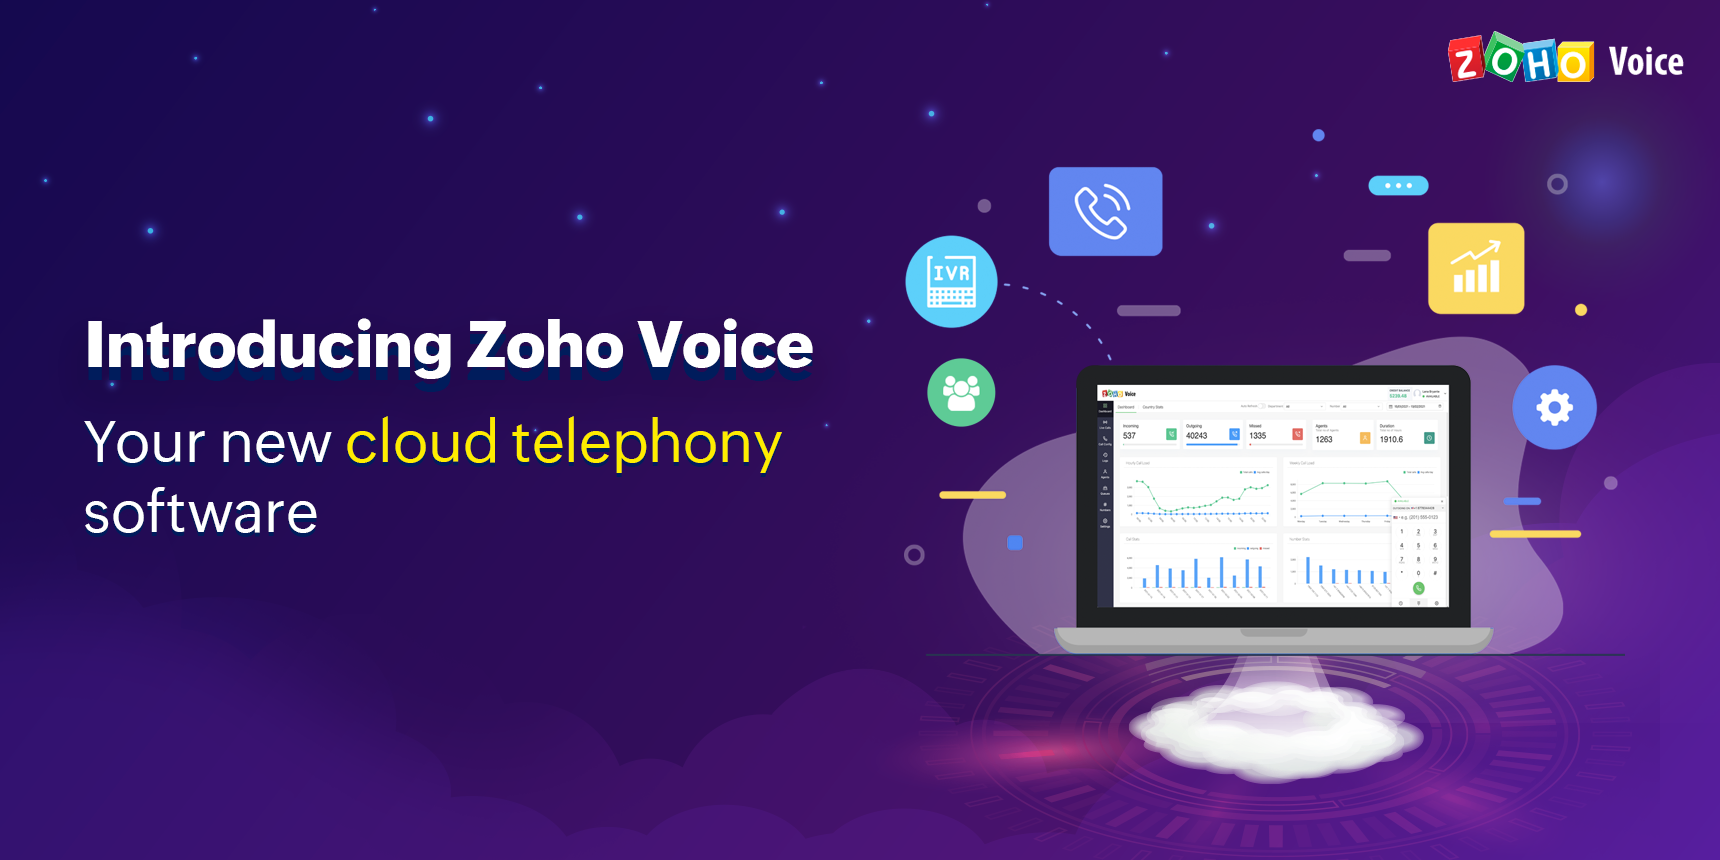 Launching Zoho Voice: Handle calls better with our new smart business phone software.